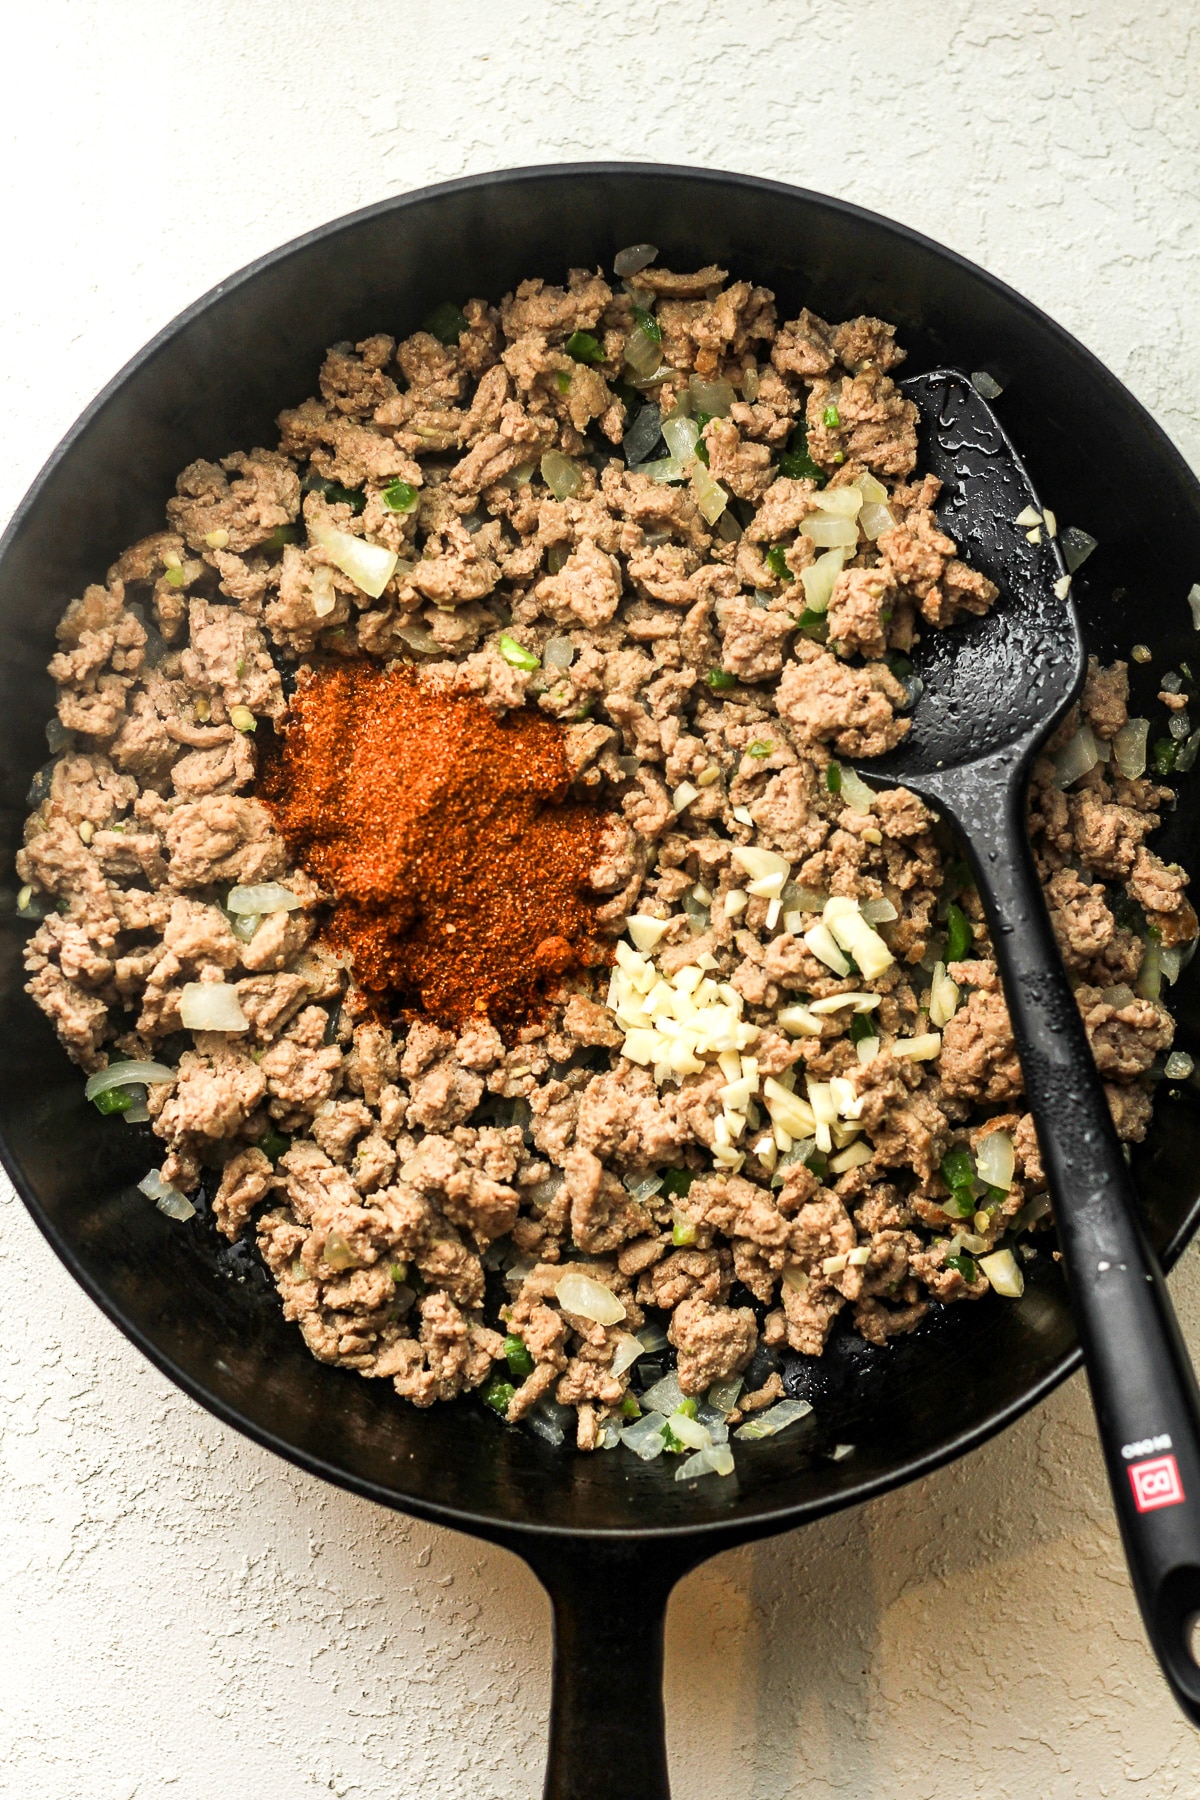 A skillet of the browned meat with the garlic and taco seasoning on top.